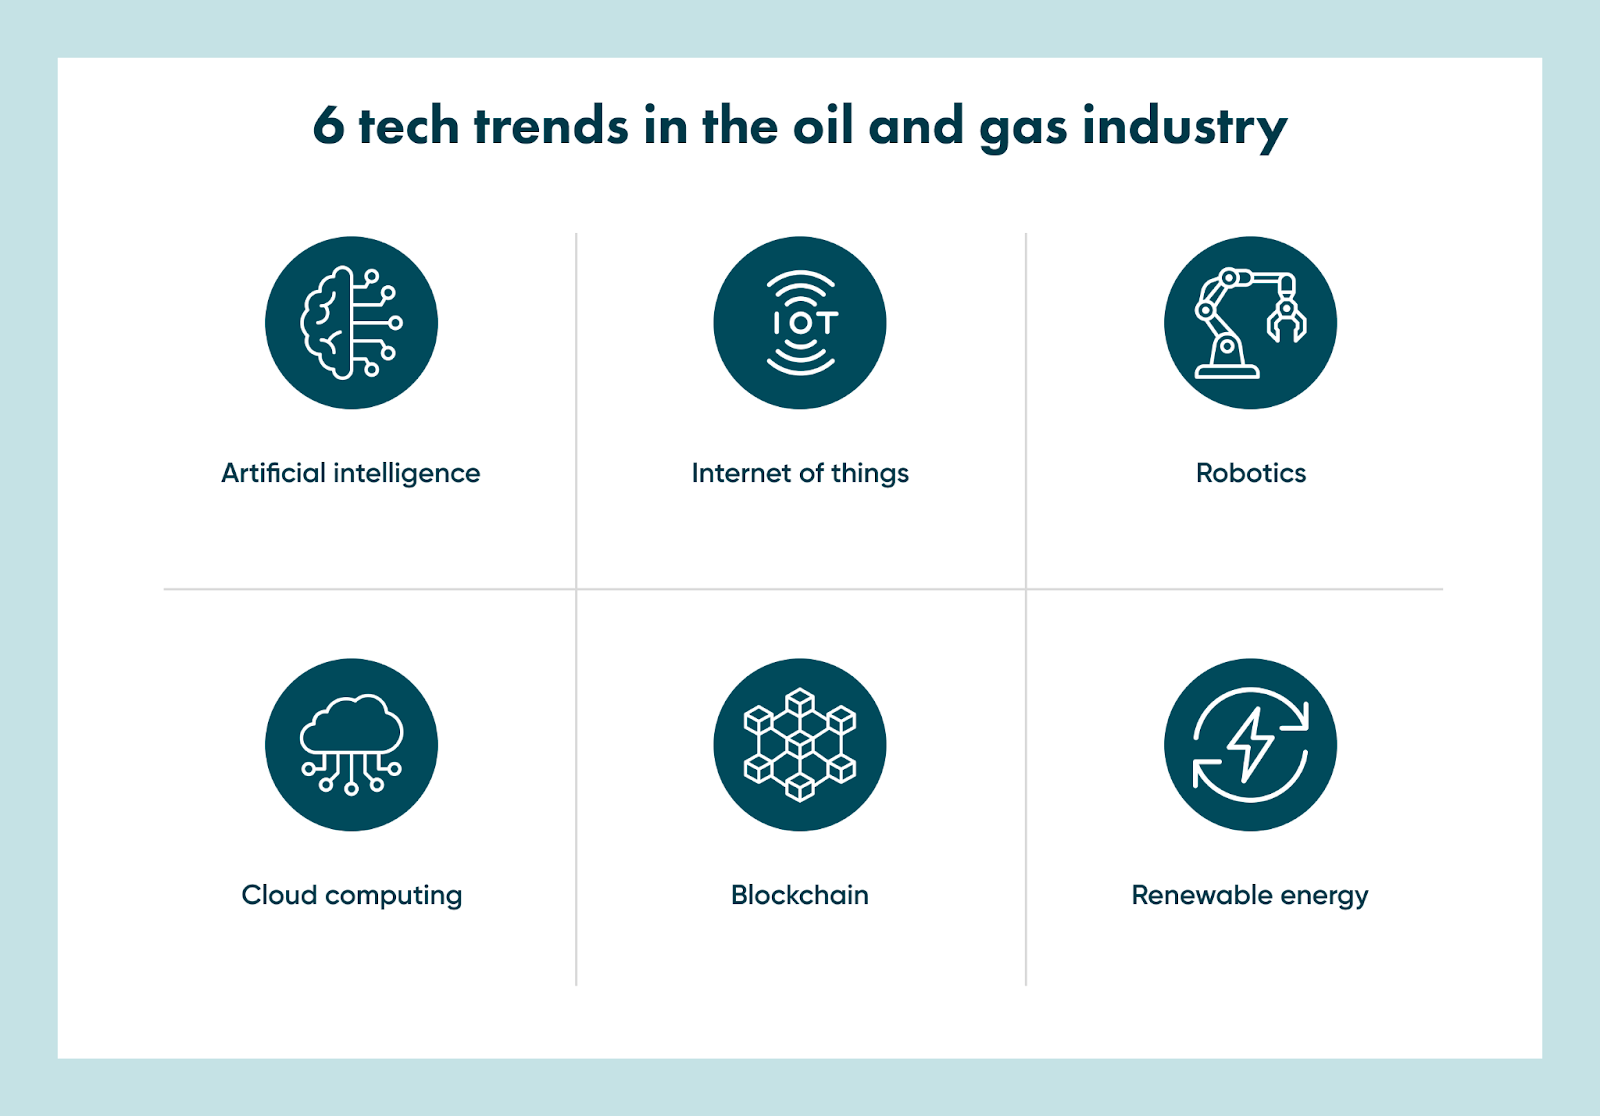 If you want to implement new oil and gas digital technology in your oil and gas business, you need to know all the trends, so learn more about them.